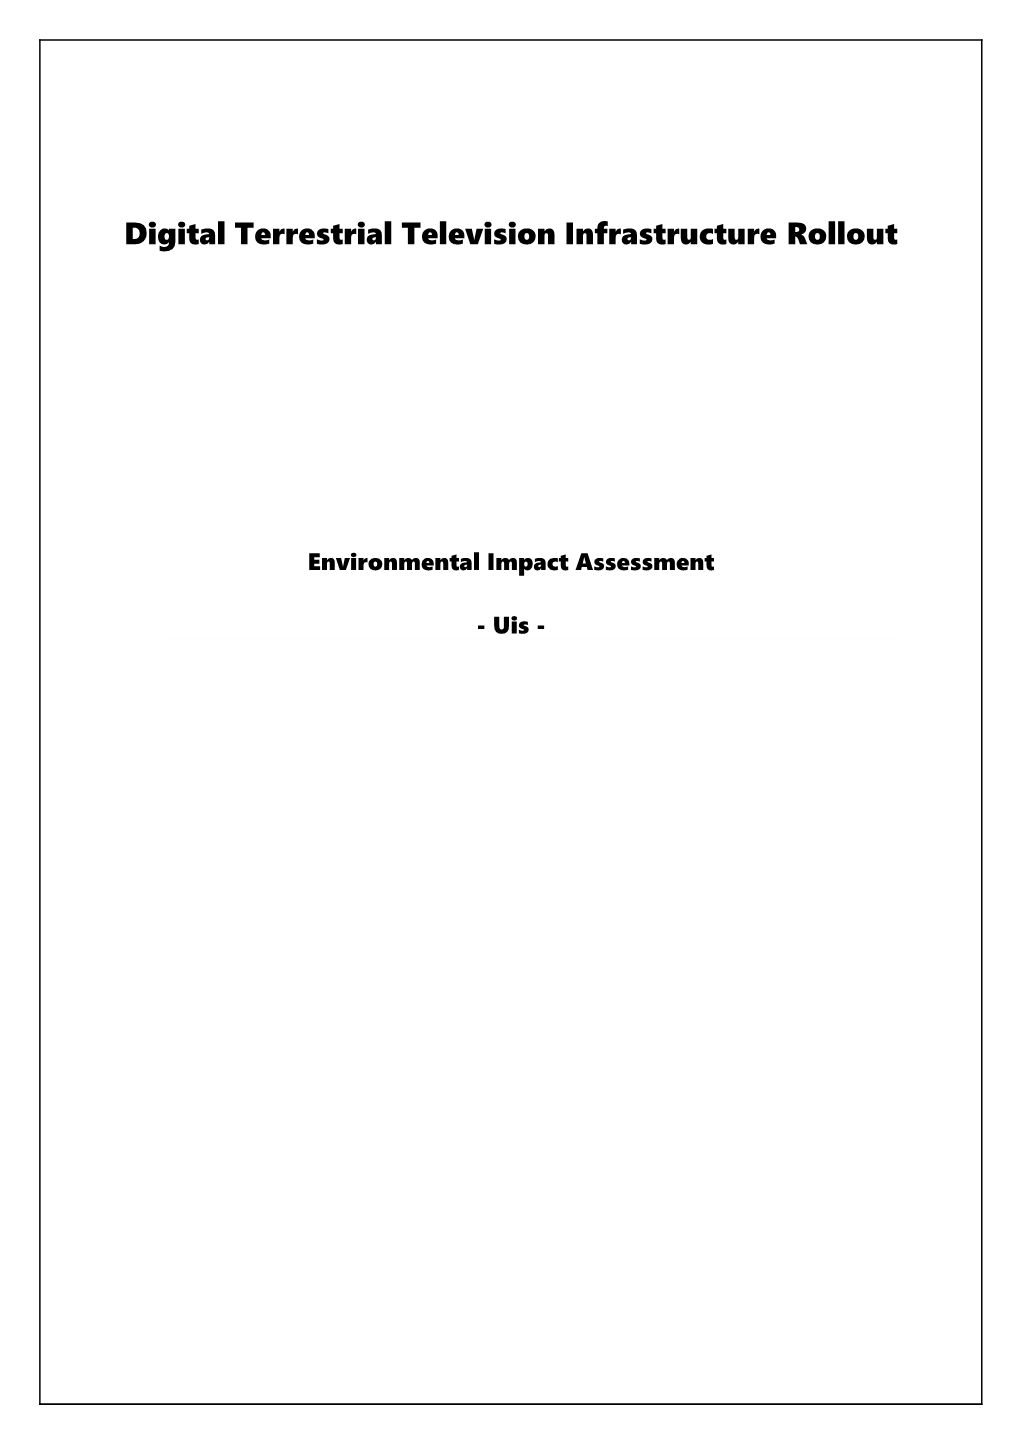 Digital Terrestrial Television Infrastructure Rollout